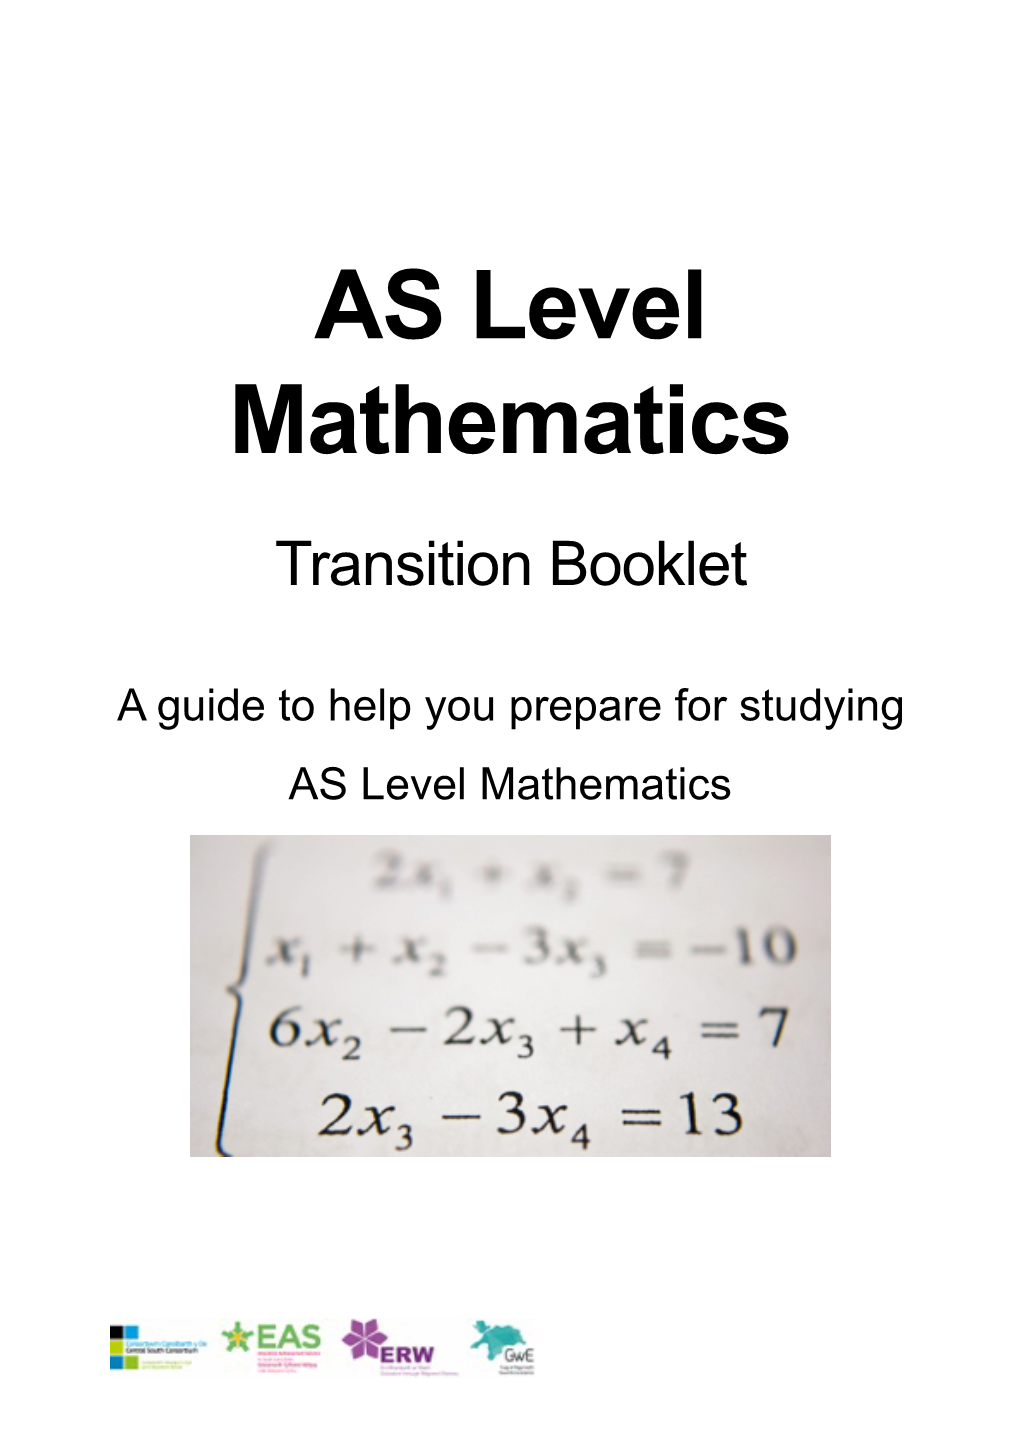 AS Level Mathematics Transition Booklet